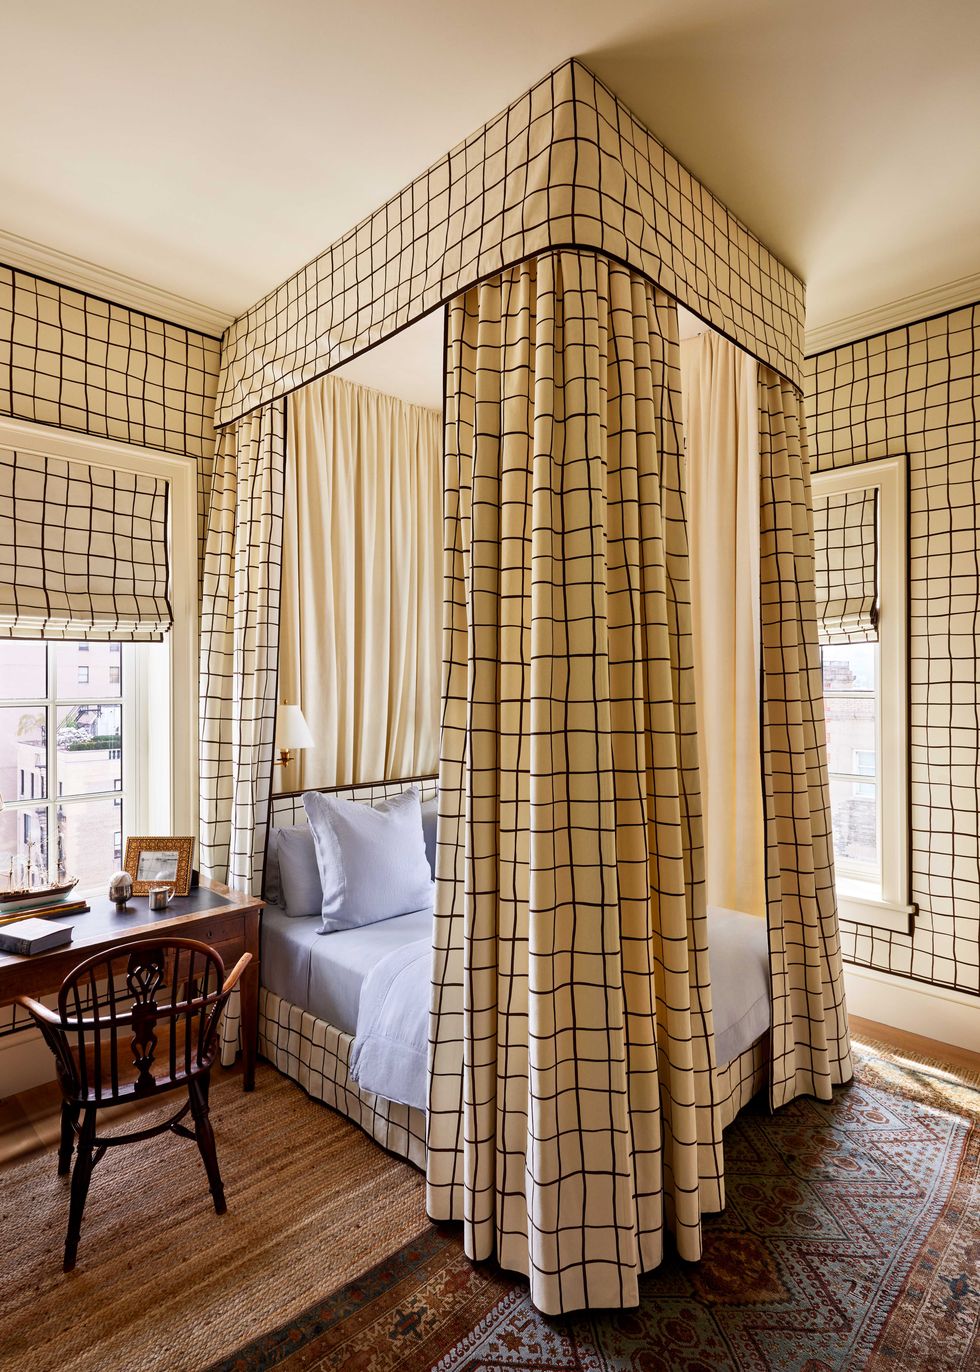 a bed with light blue linens is surrounded by a canopy and curtains in a light yellow with black windowpanes fabric, which matches the wallpaper and window shades, a wooden writing table and chair sit next to the bed